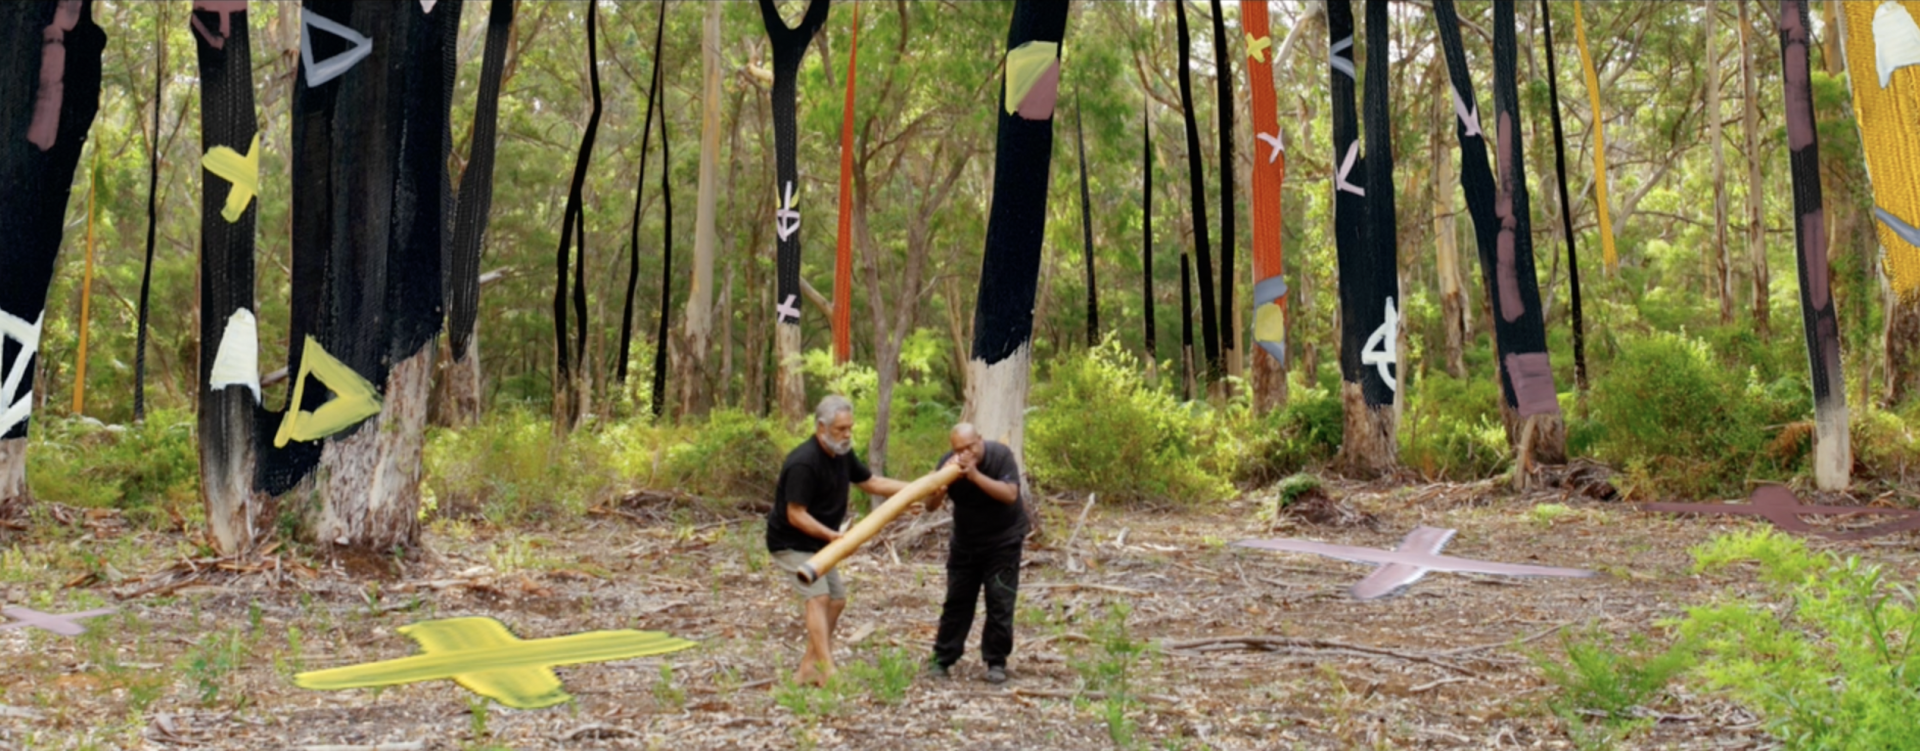 Video still from WA Museum Digital Art Project artwork Kaya Boodja by Patrick Carter.  Patrick Carter with Kelton Pell and animated artworks on trees, Wadandi Country, WA, 2023. Image courtesy of MyPlace.